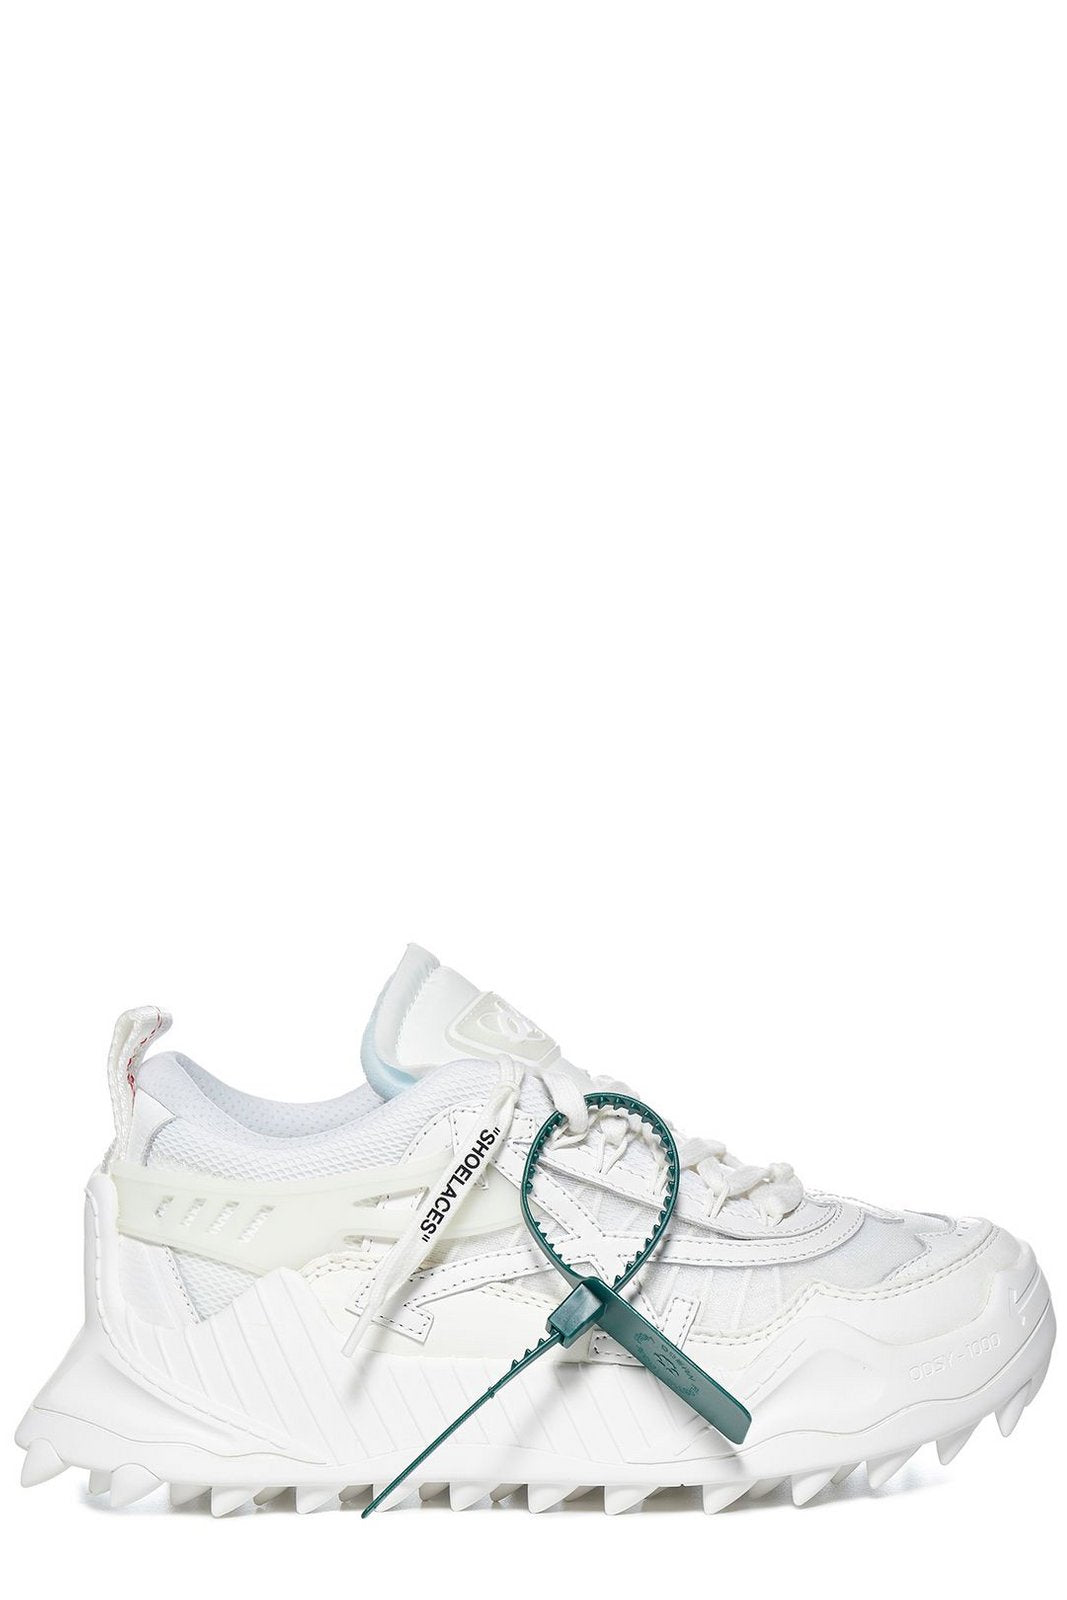 Off-White Odsy Lace-Up Sneakers